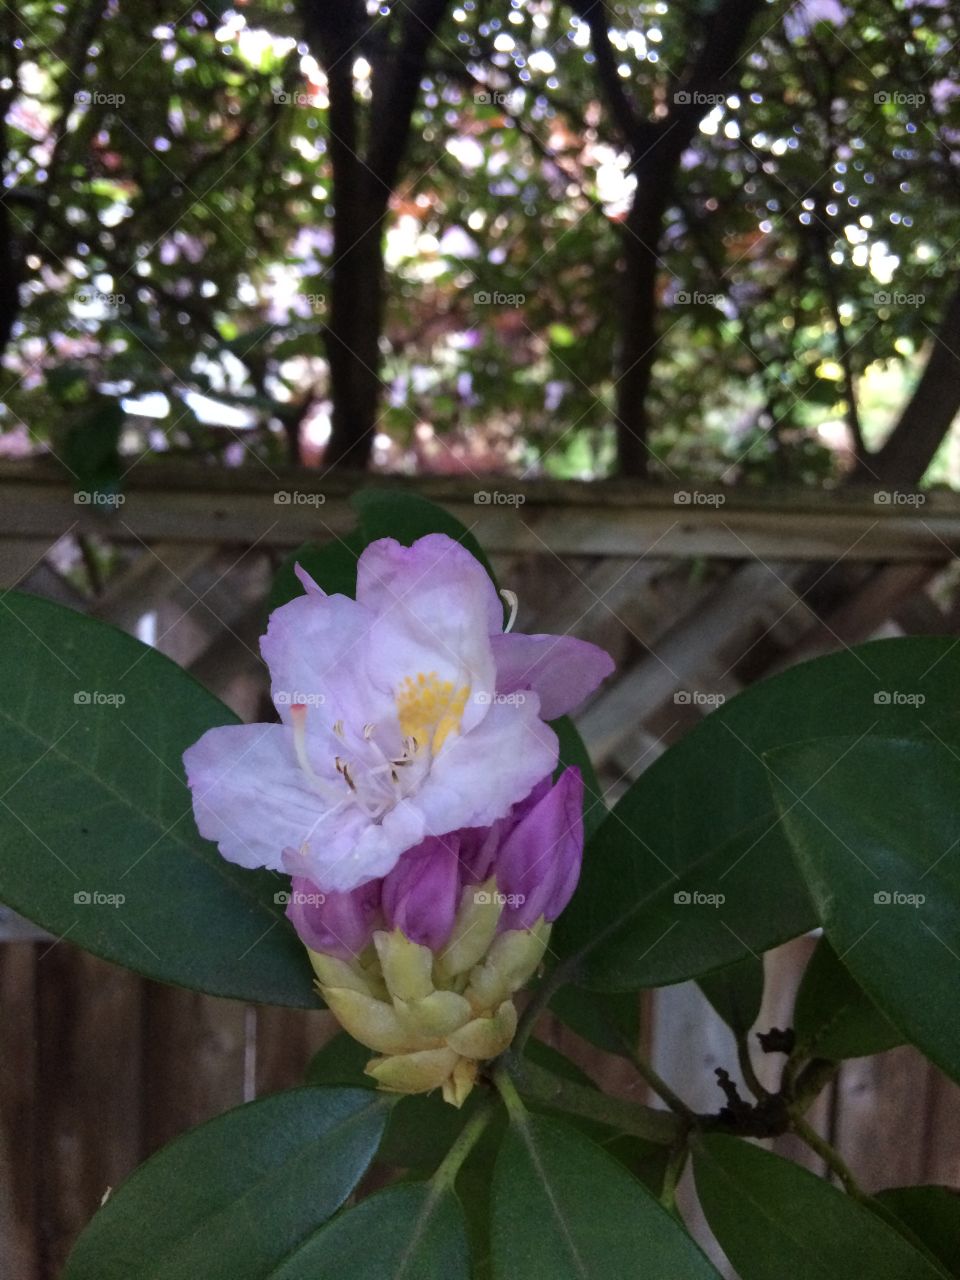 Rhododendron stating to bloom